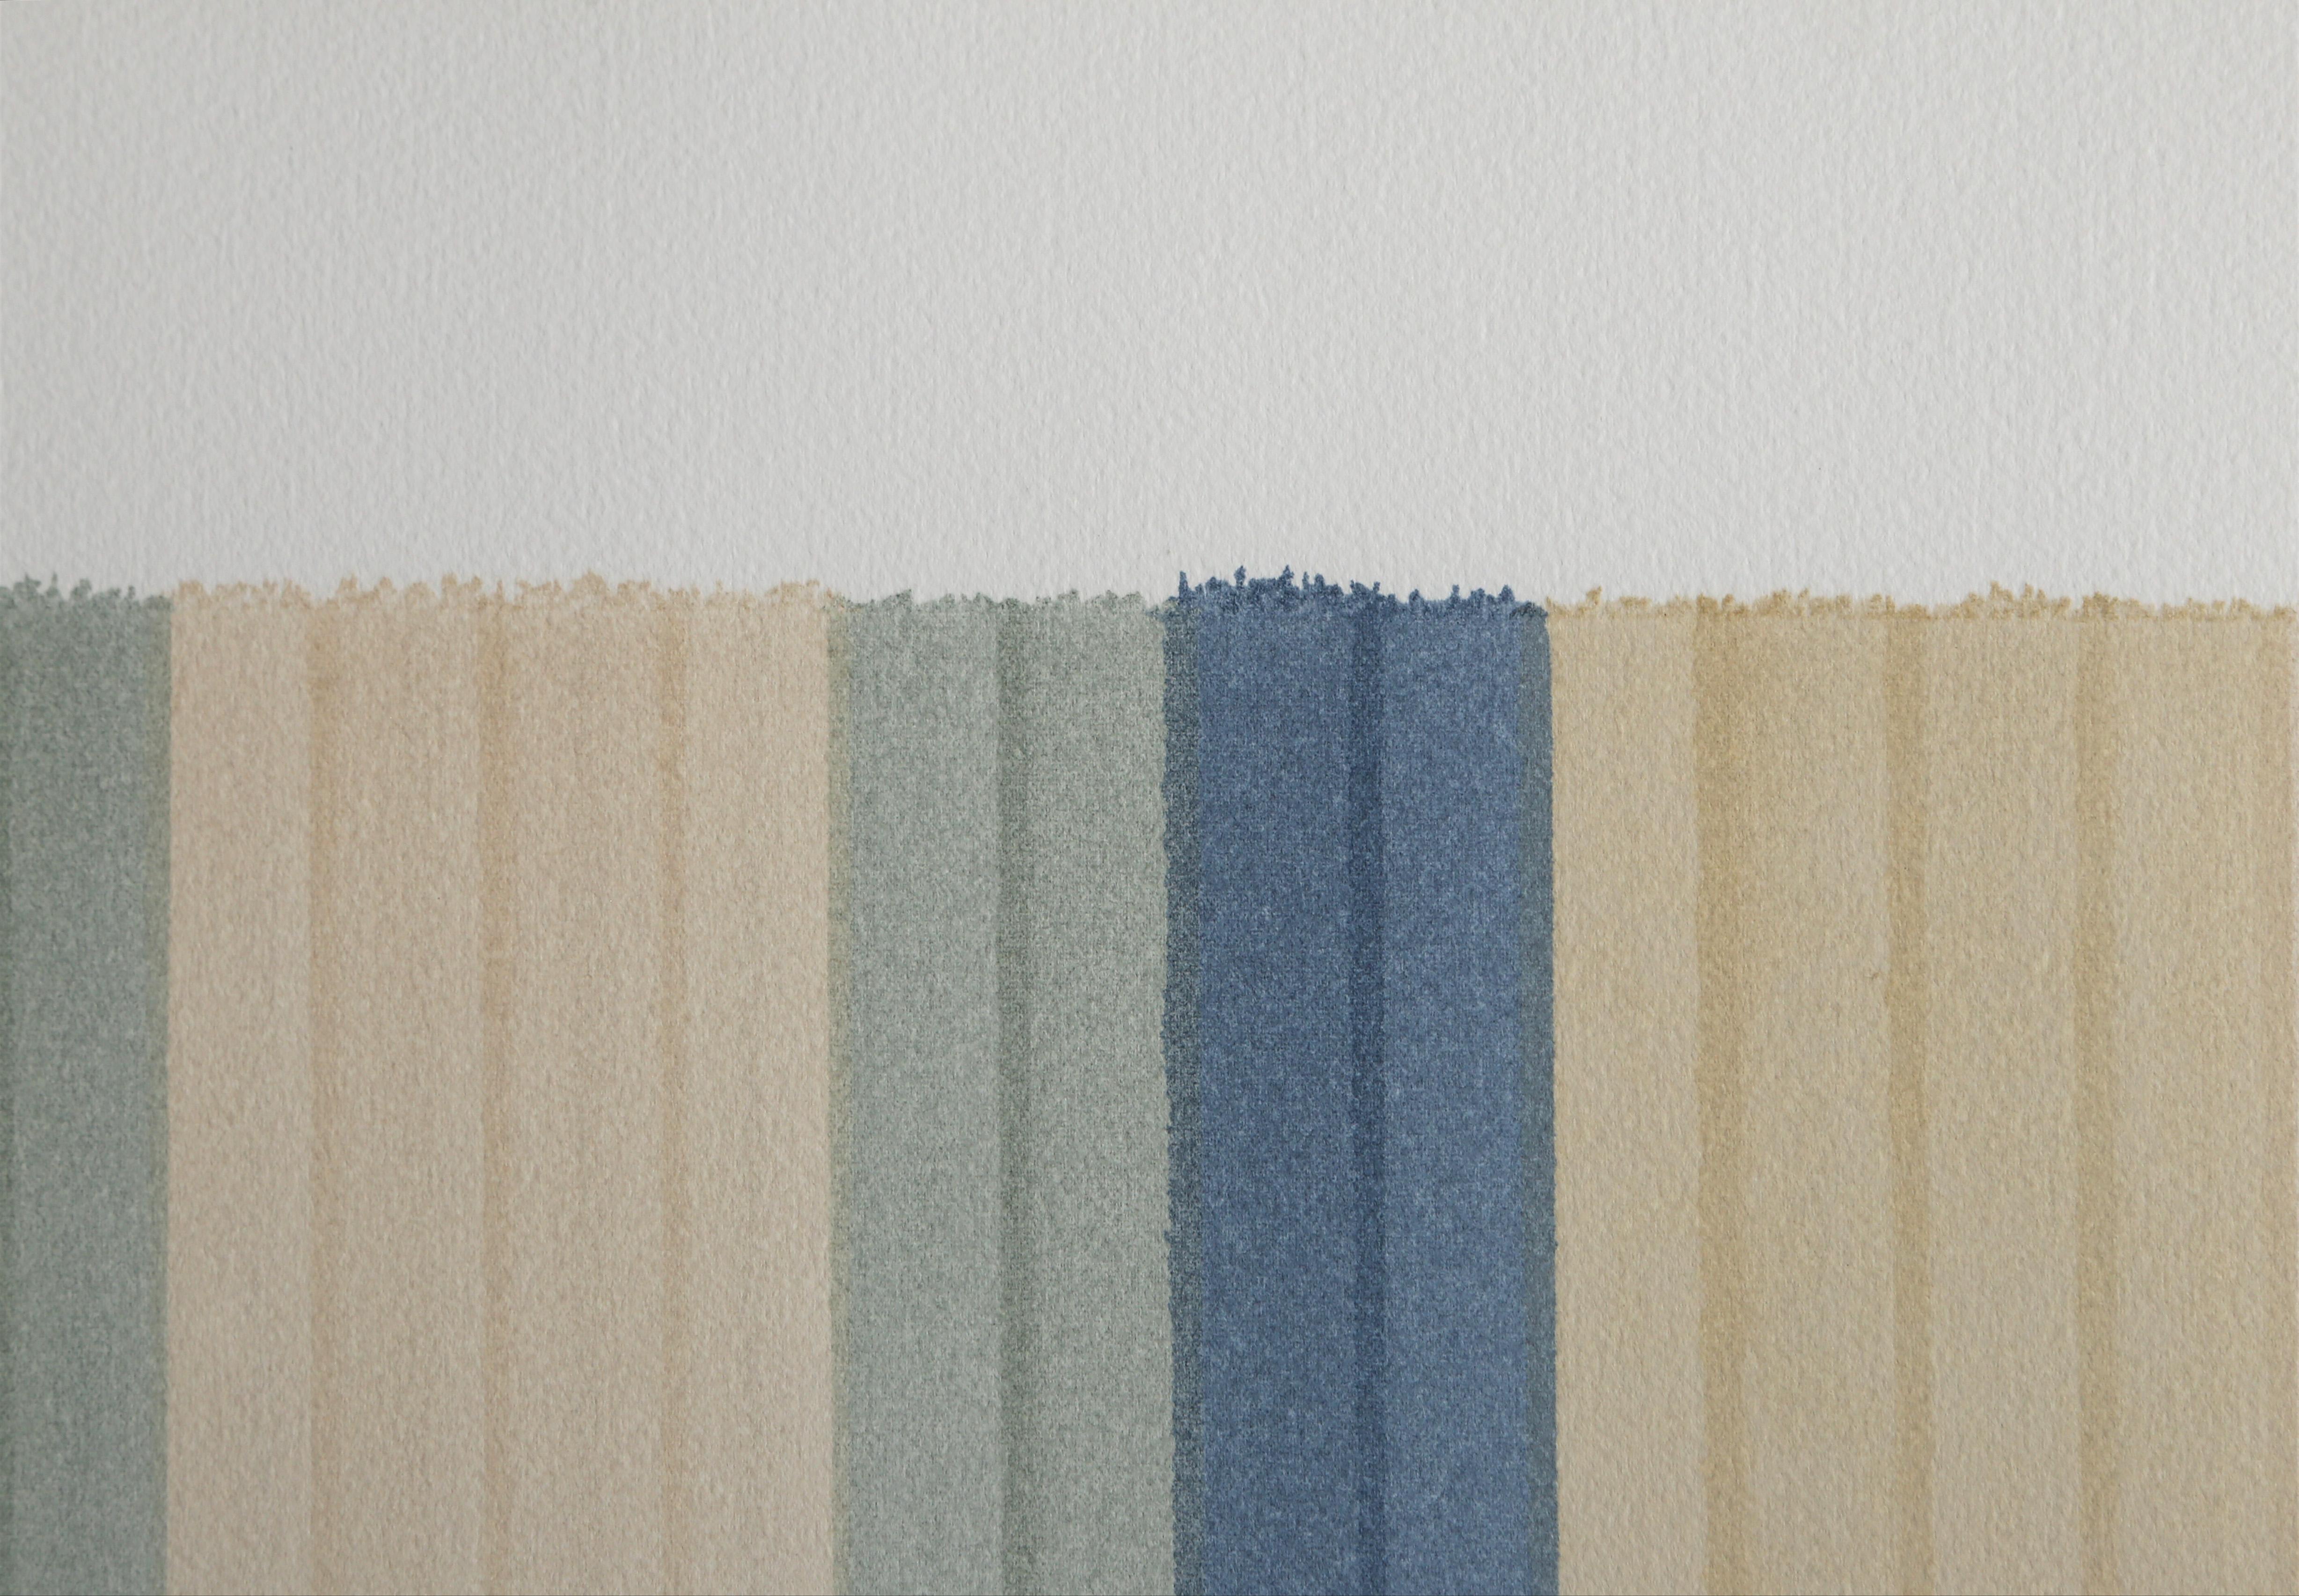 Untitled No. 11, Minimalist Stripe painting by Francisca Sutil 2